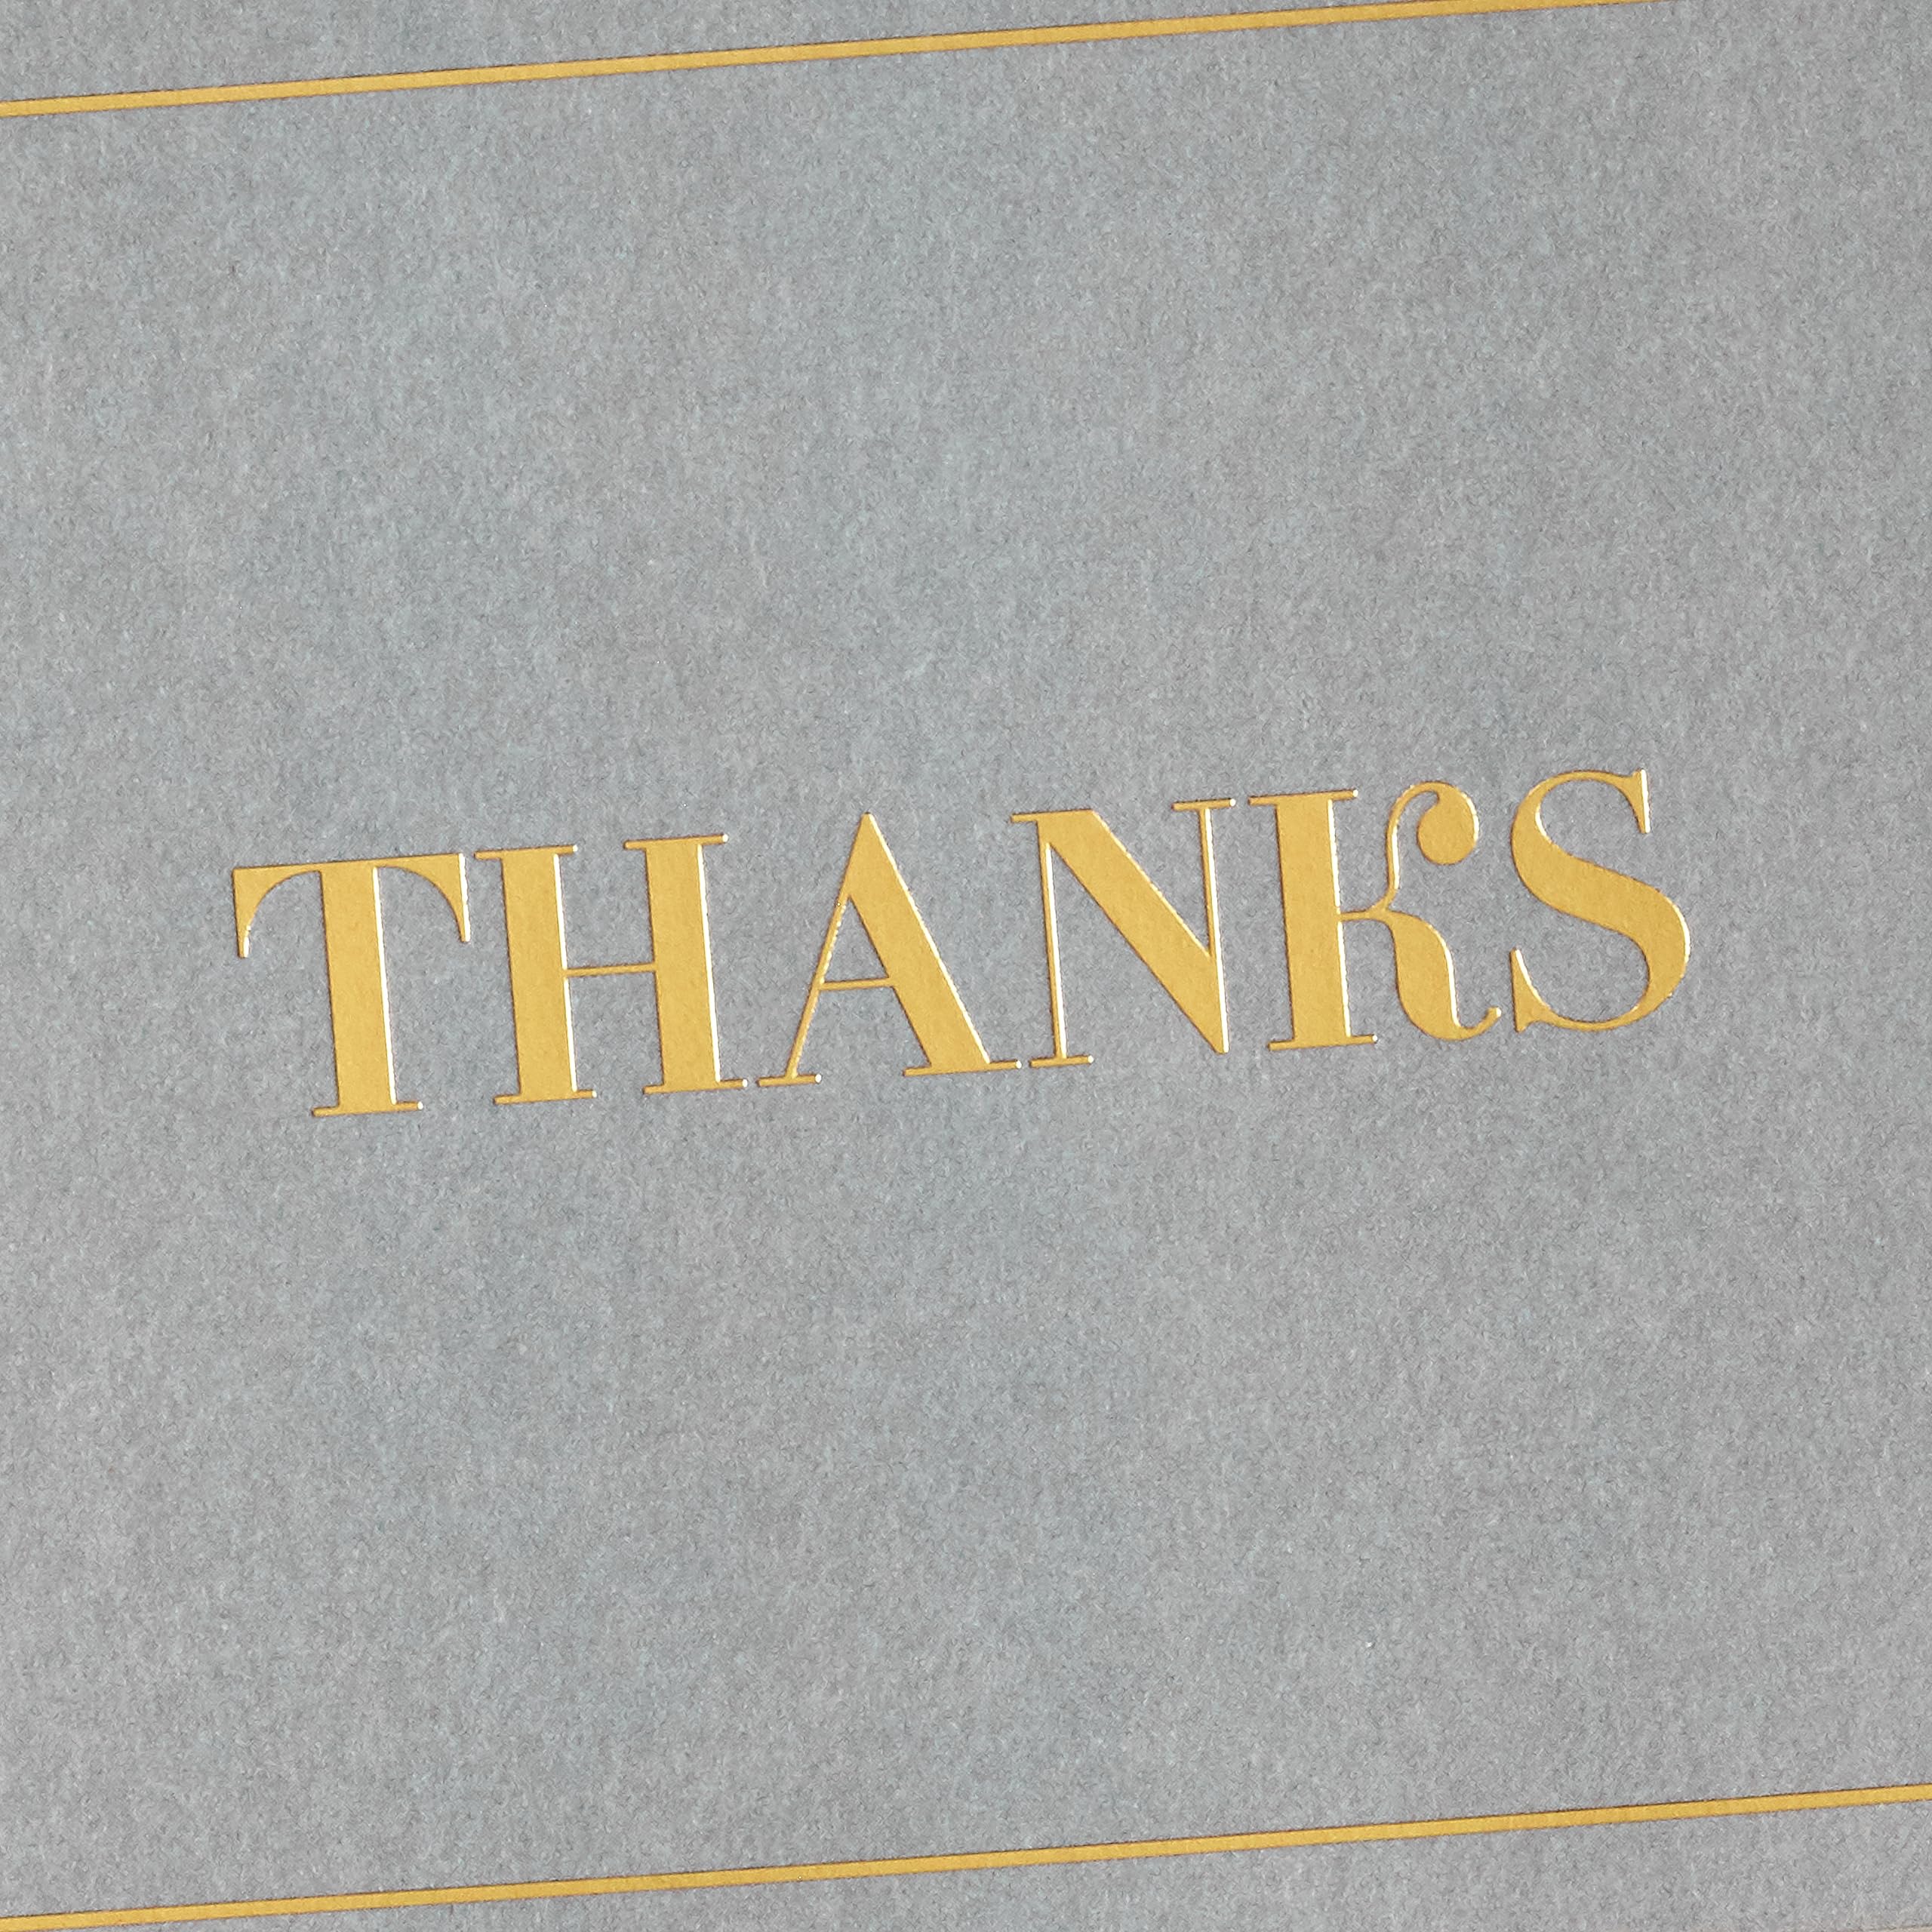 Hallmark Bulk Thank You Notes, Gray and Gold (100 Blank Cards with Envelopes)